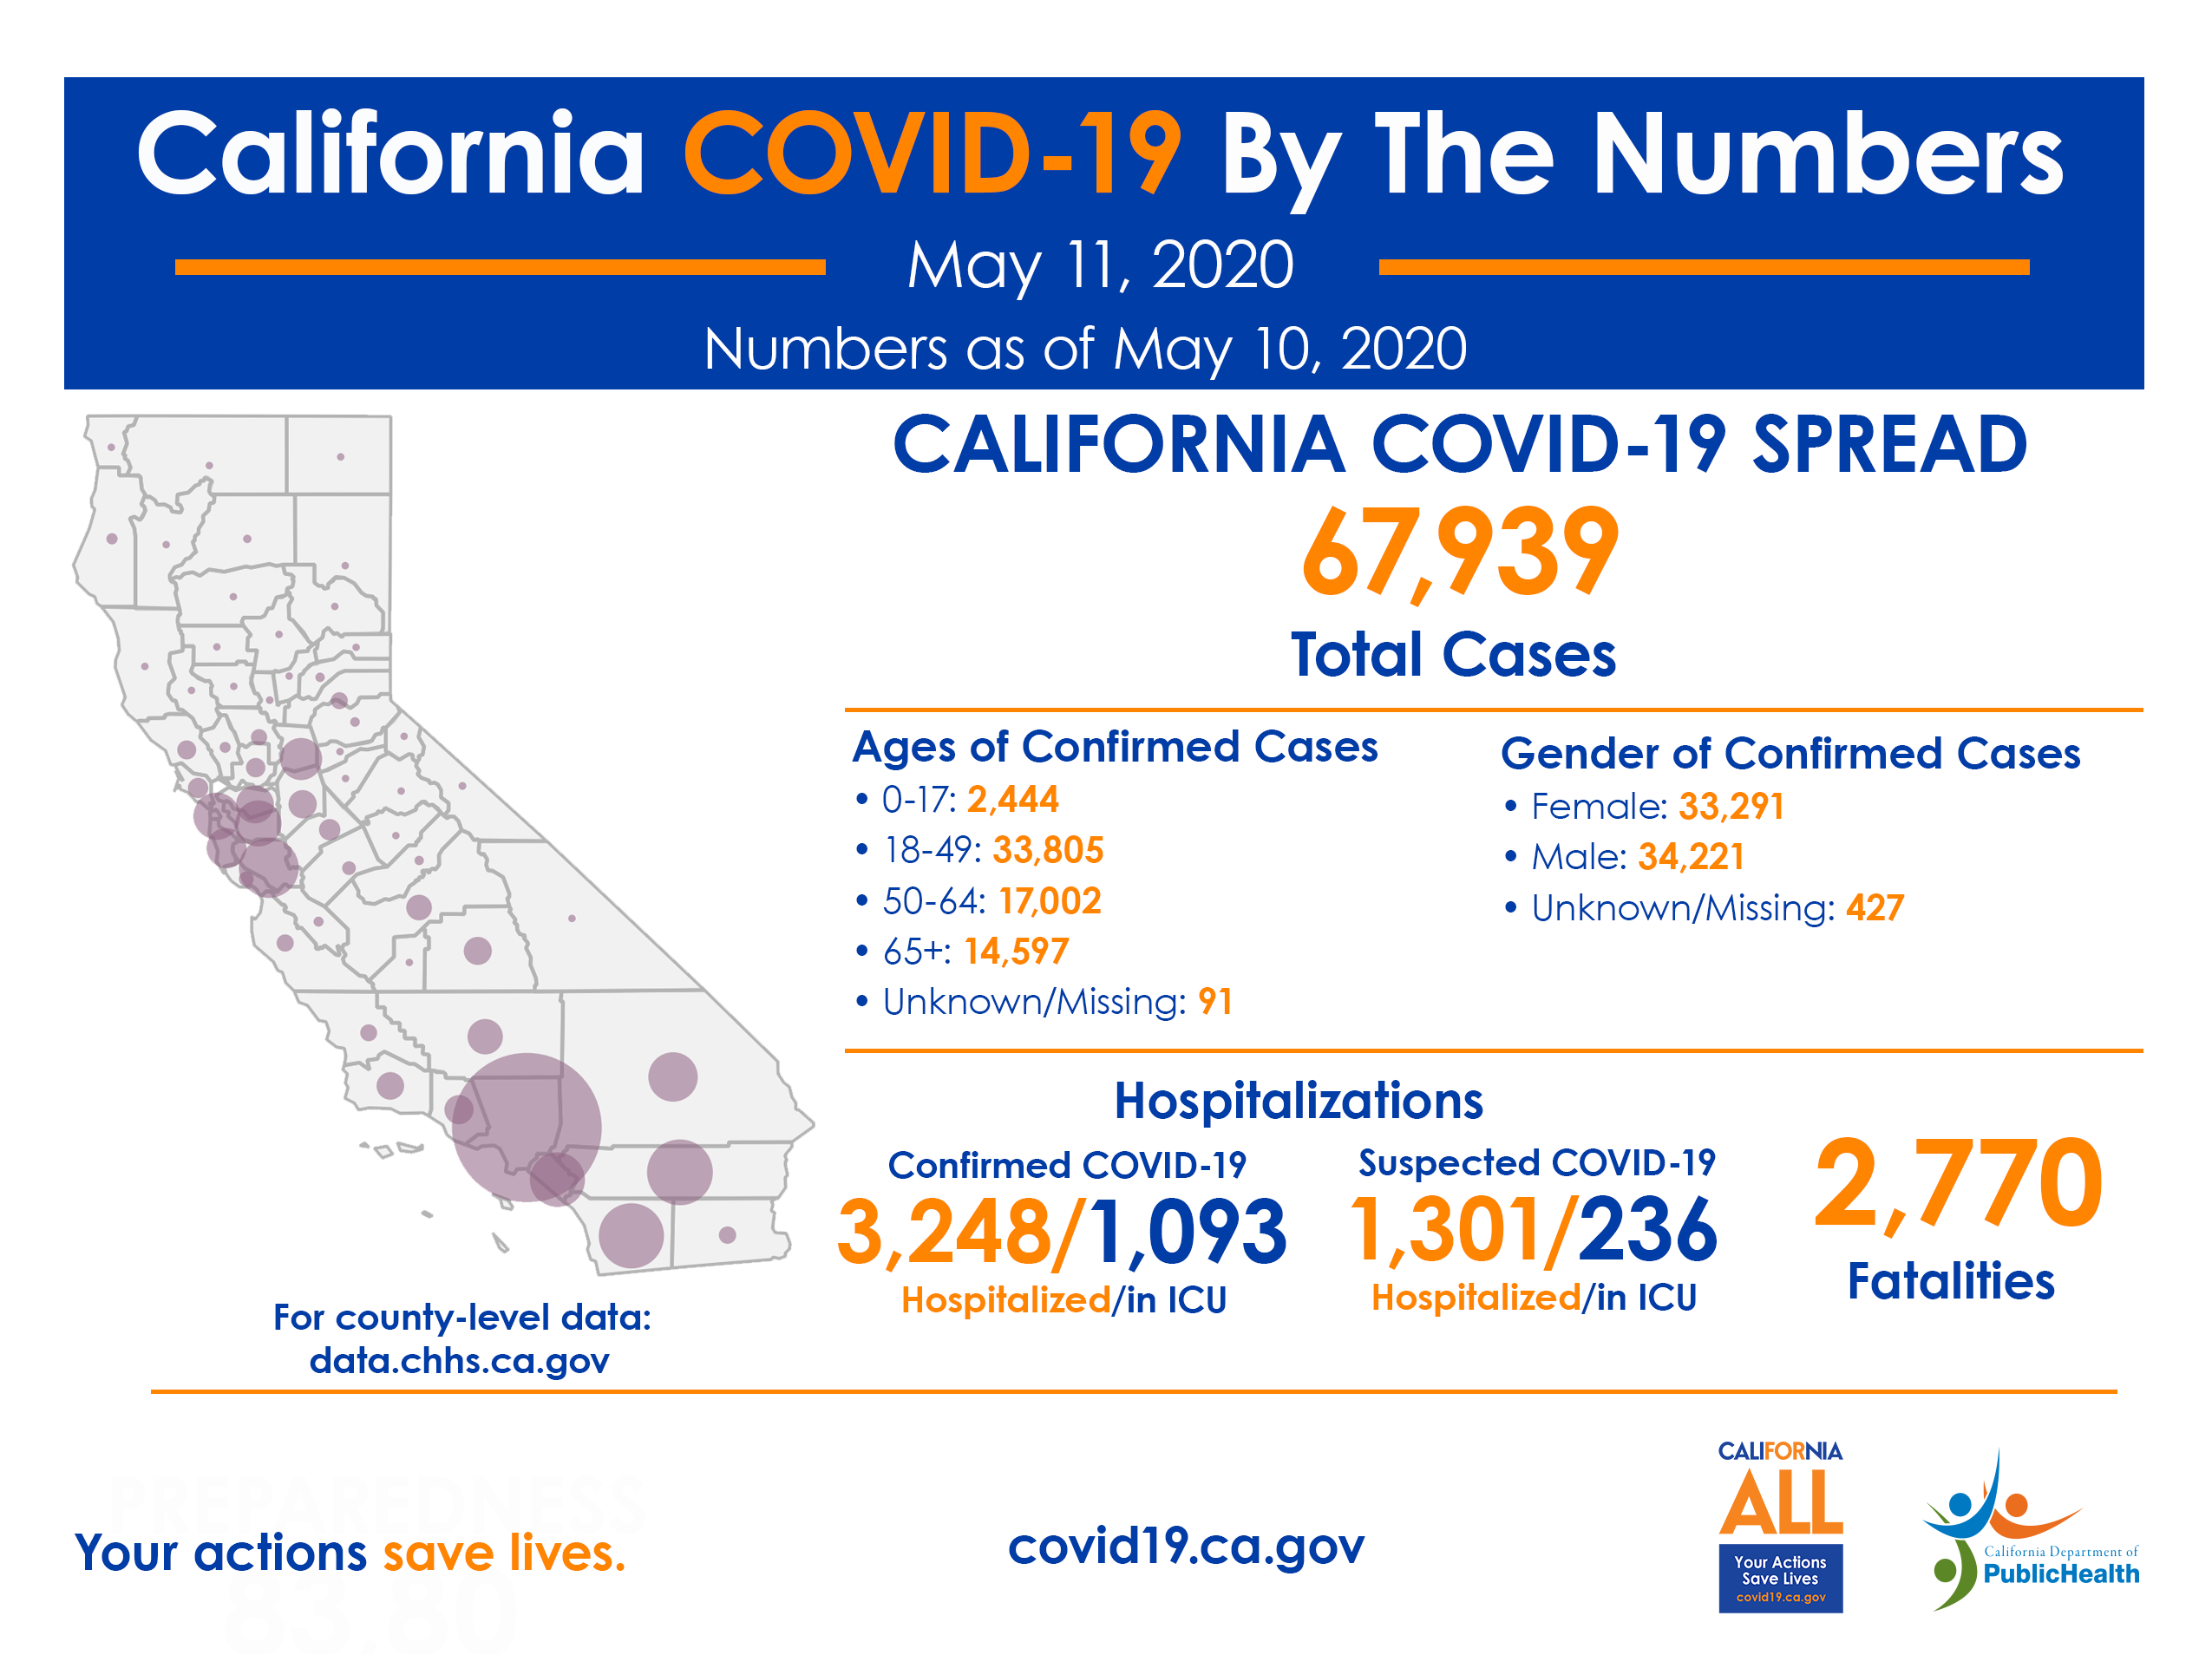 California COVID-19 by the Numbers as of May 10, 2020